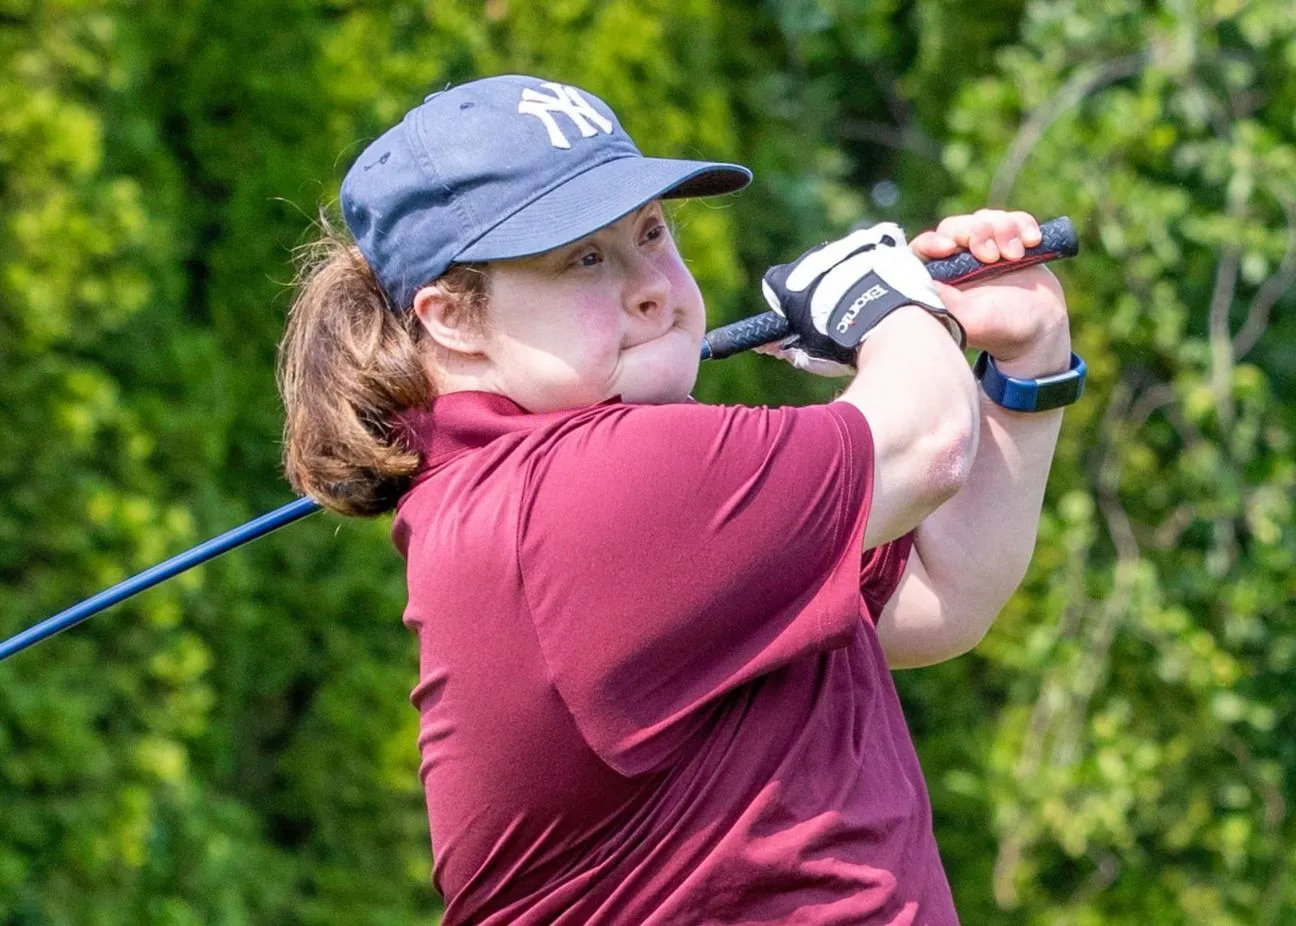 Female athlete in maroon golf shirt and New York Yankees hat holding her golf stroke watching the ball land.